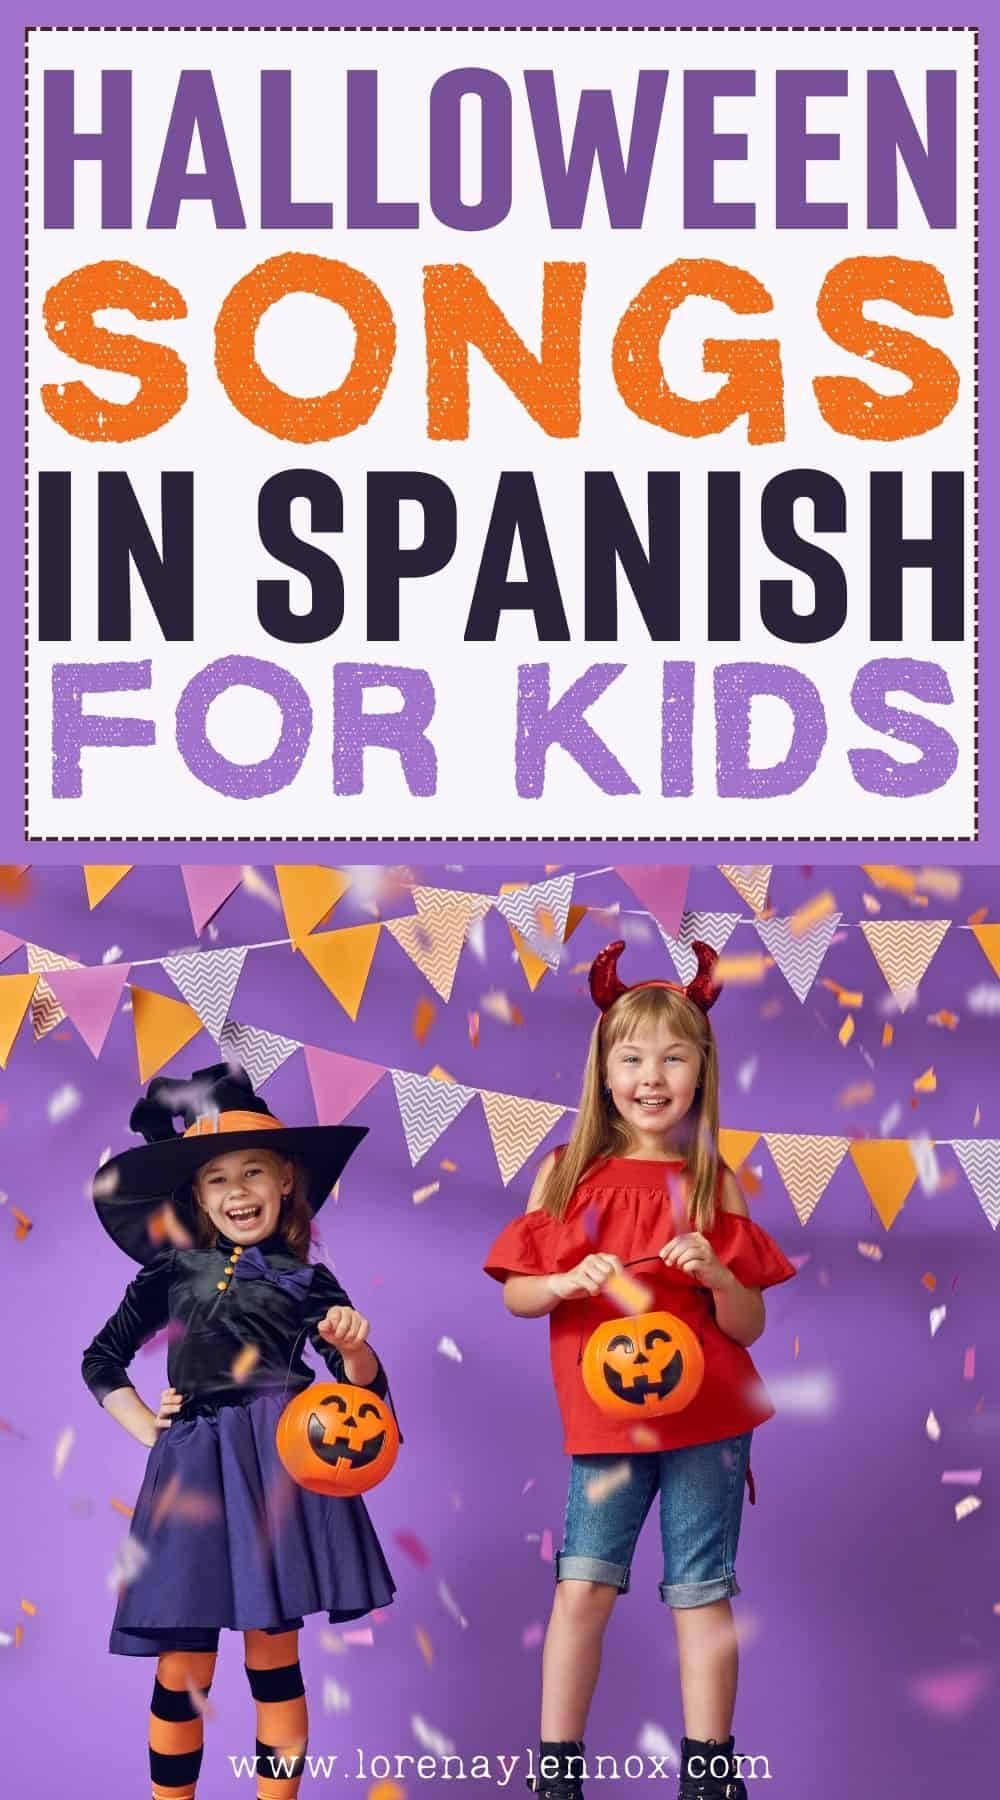 "Discover a bewitching collection of Halloween songs in Spanish for kids! Get your little ones in the spooky spirit with these catchy tunes that celebrate Dia de los Muertos and Halloween traditions. Perfect for language learning and family fun."